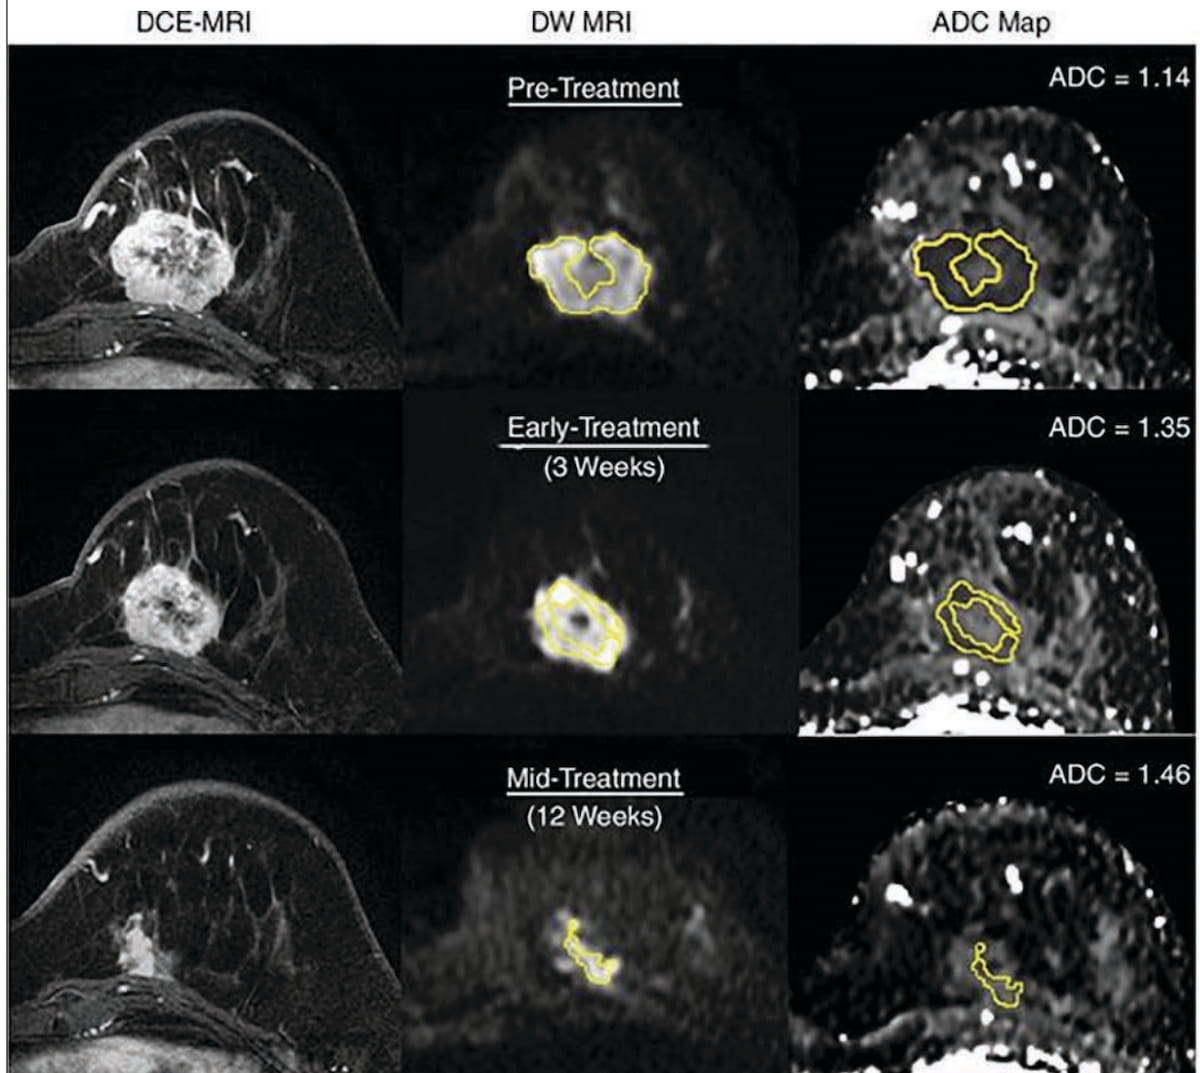 Can DWI MRI Offer a Viable Non-Contrast Alternative for Breast Cancer Assessment?